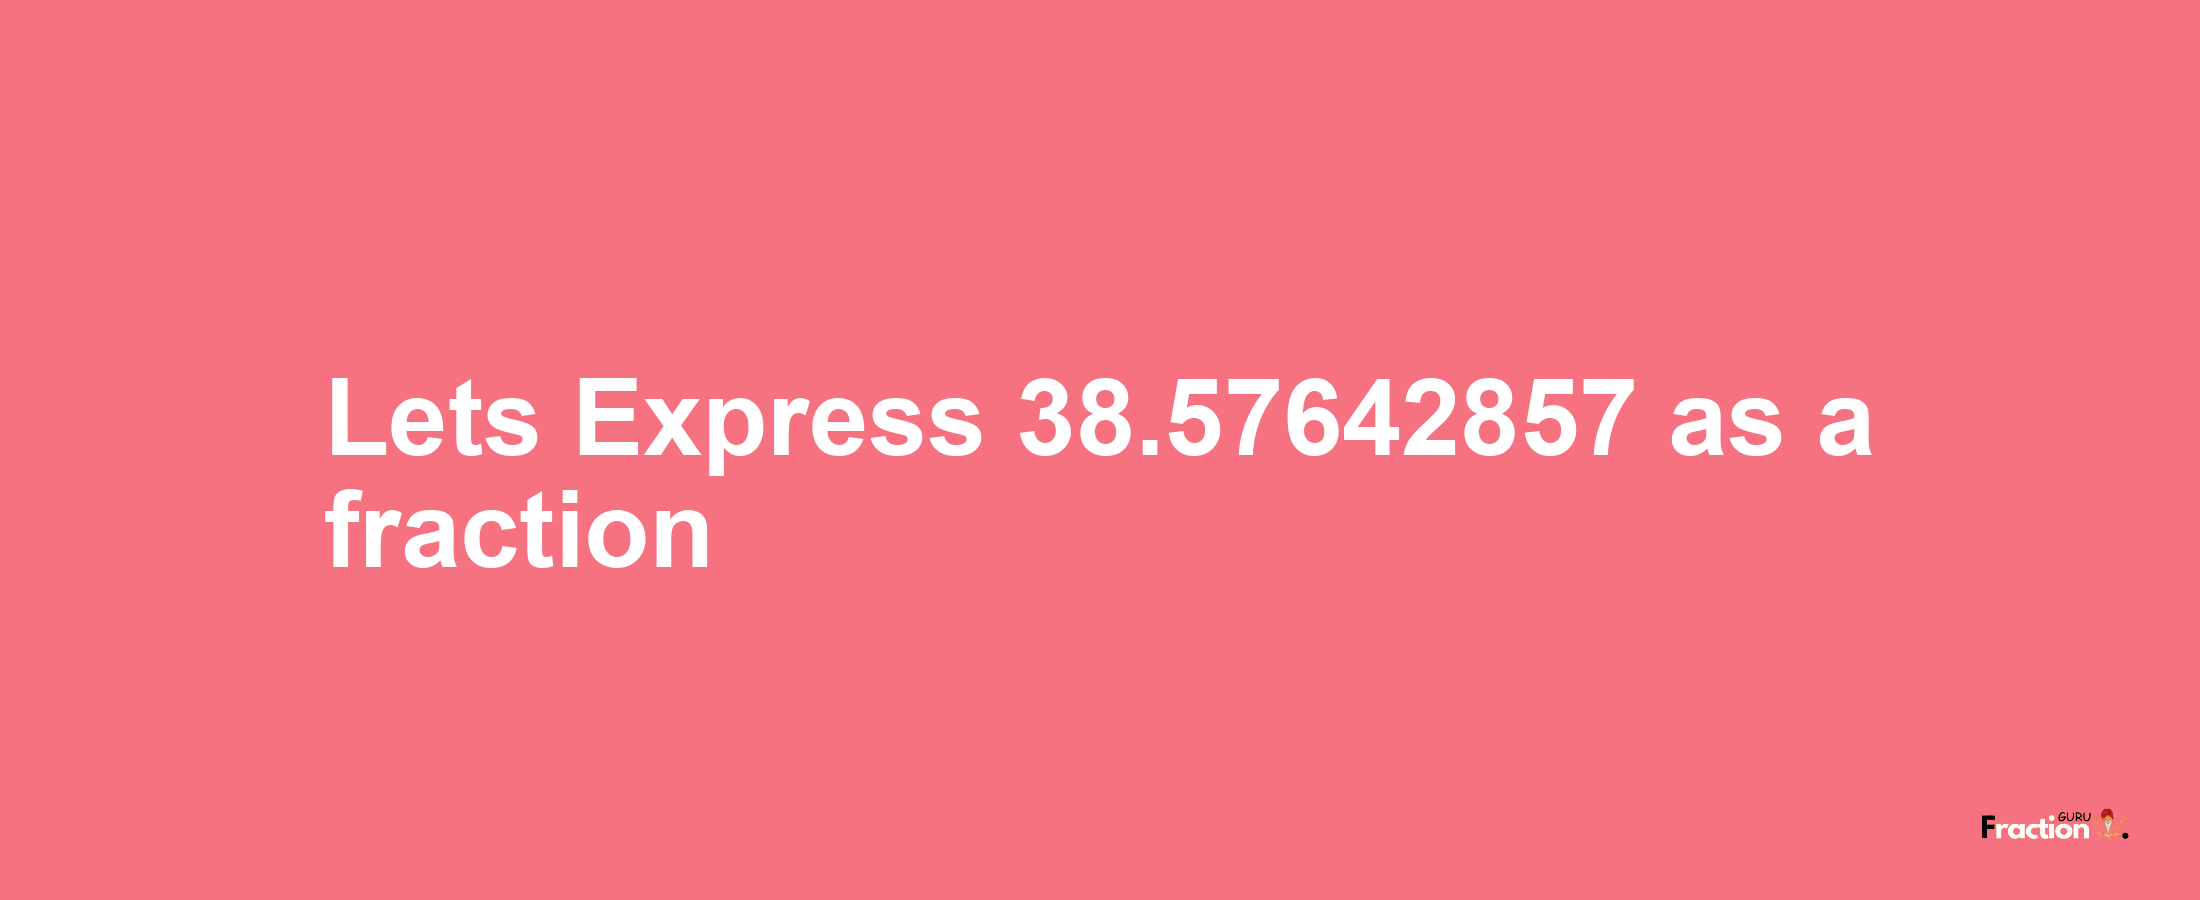 Lets Express 38.57642857 as afraction